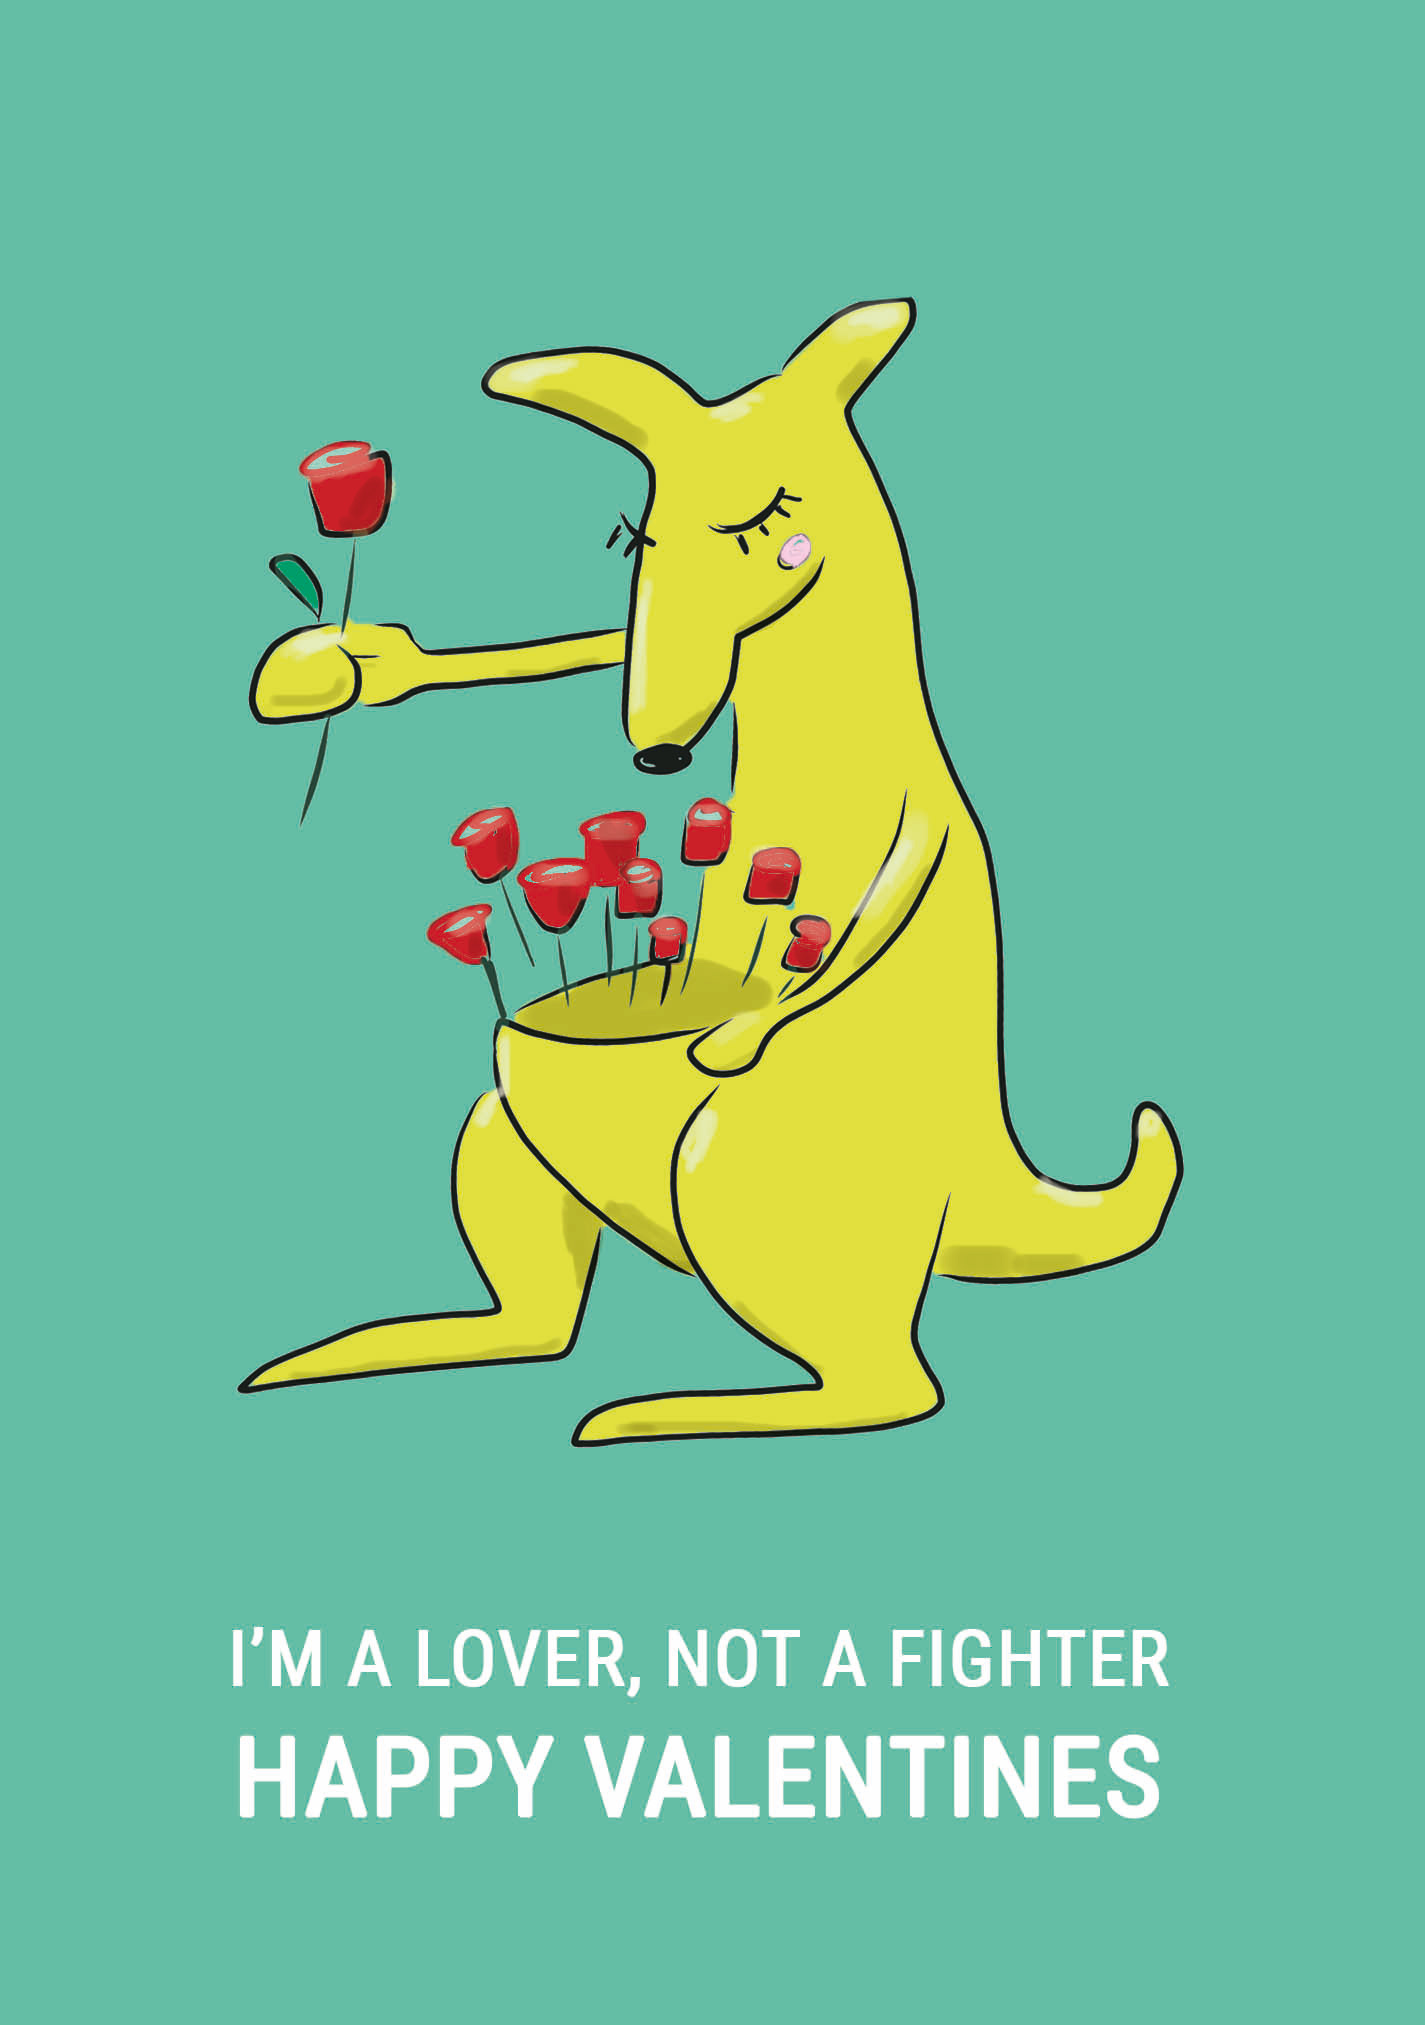 I'm A Lover Not A Fighter: Happy Valentines